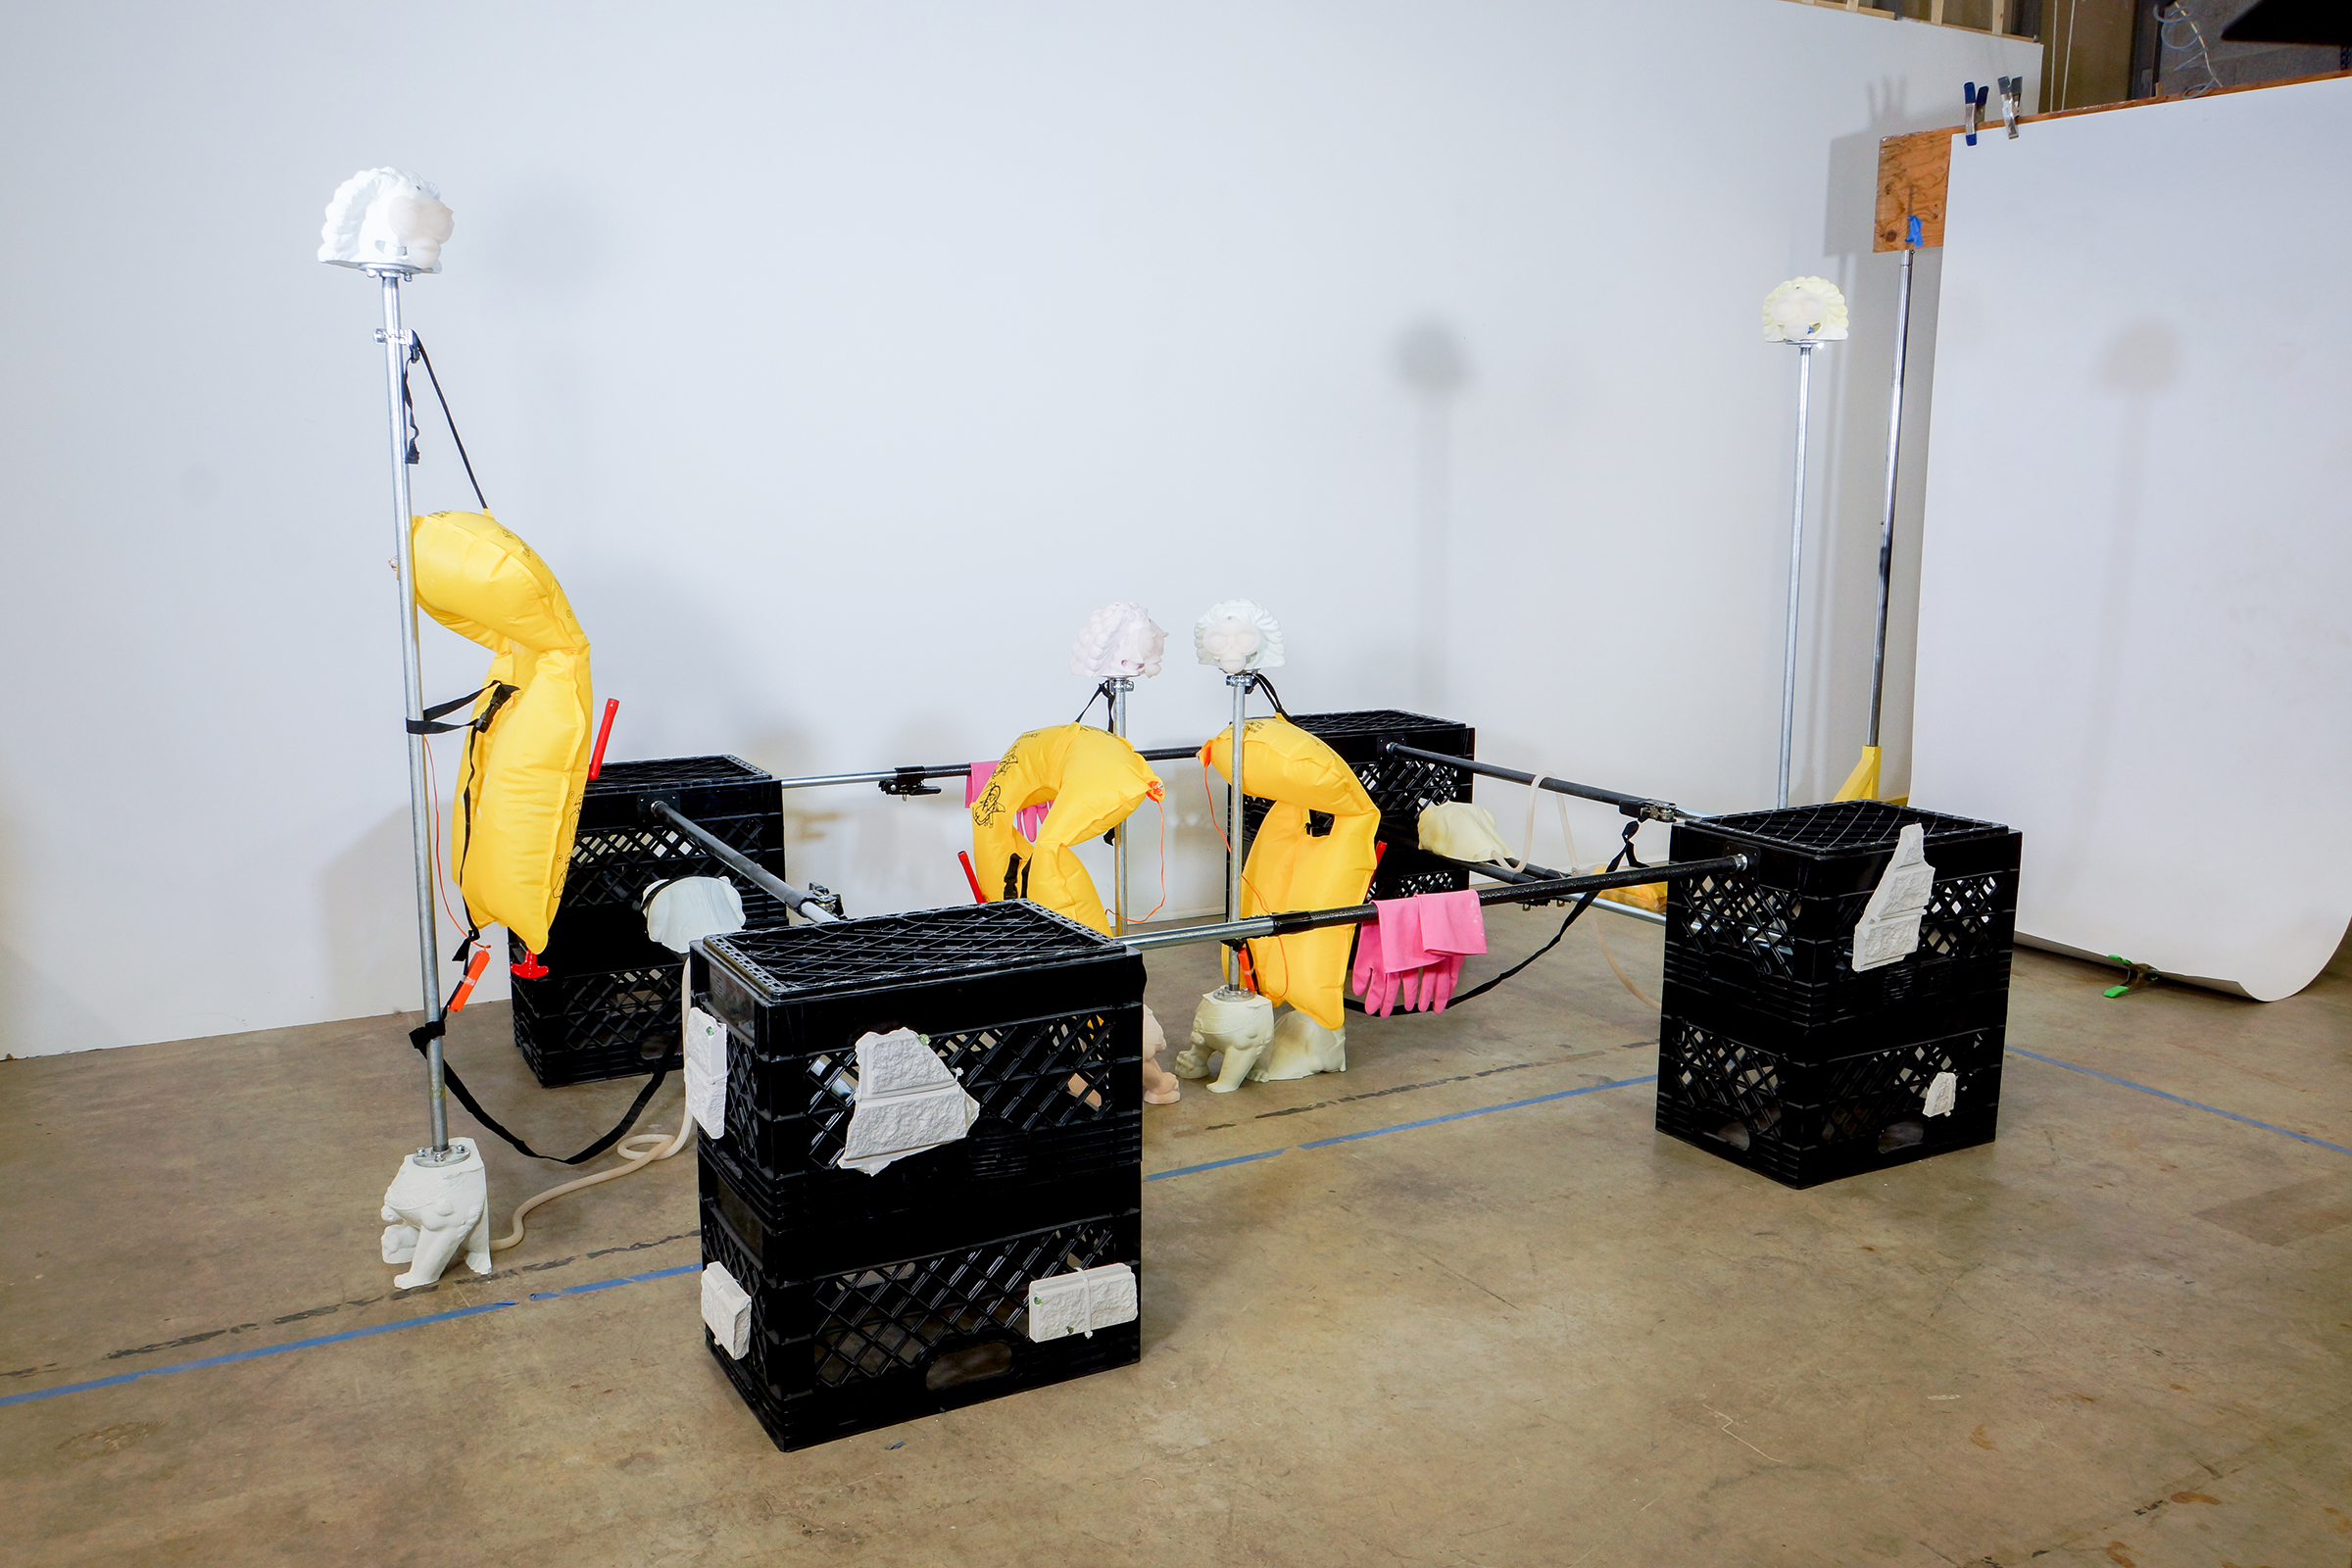 Censorium, milk crates, pigmented plaster, cargo bars, life vests, metal piping, glass marbles, silicone, rubber gloves, and zip ties by Craig Jun Li.